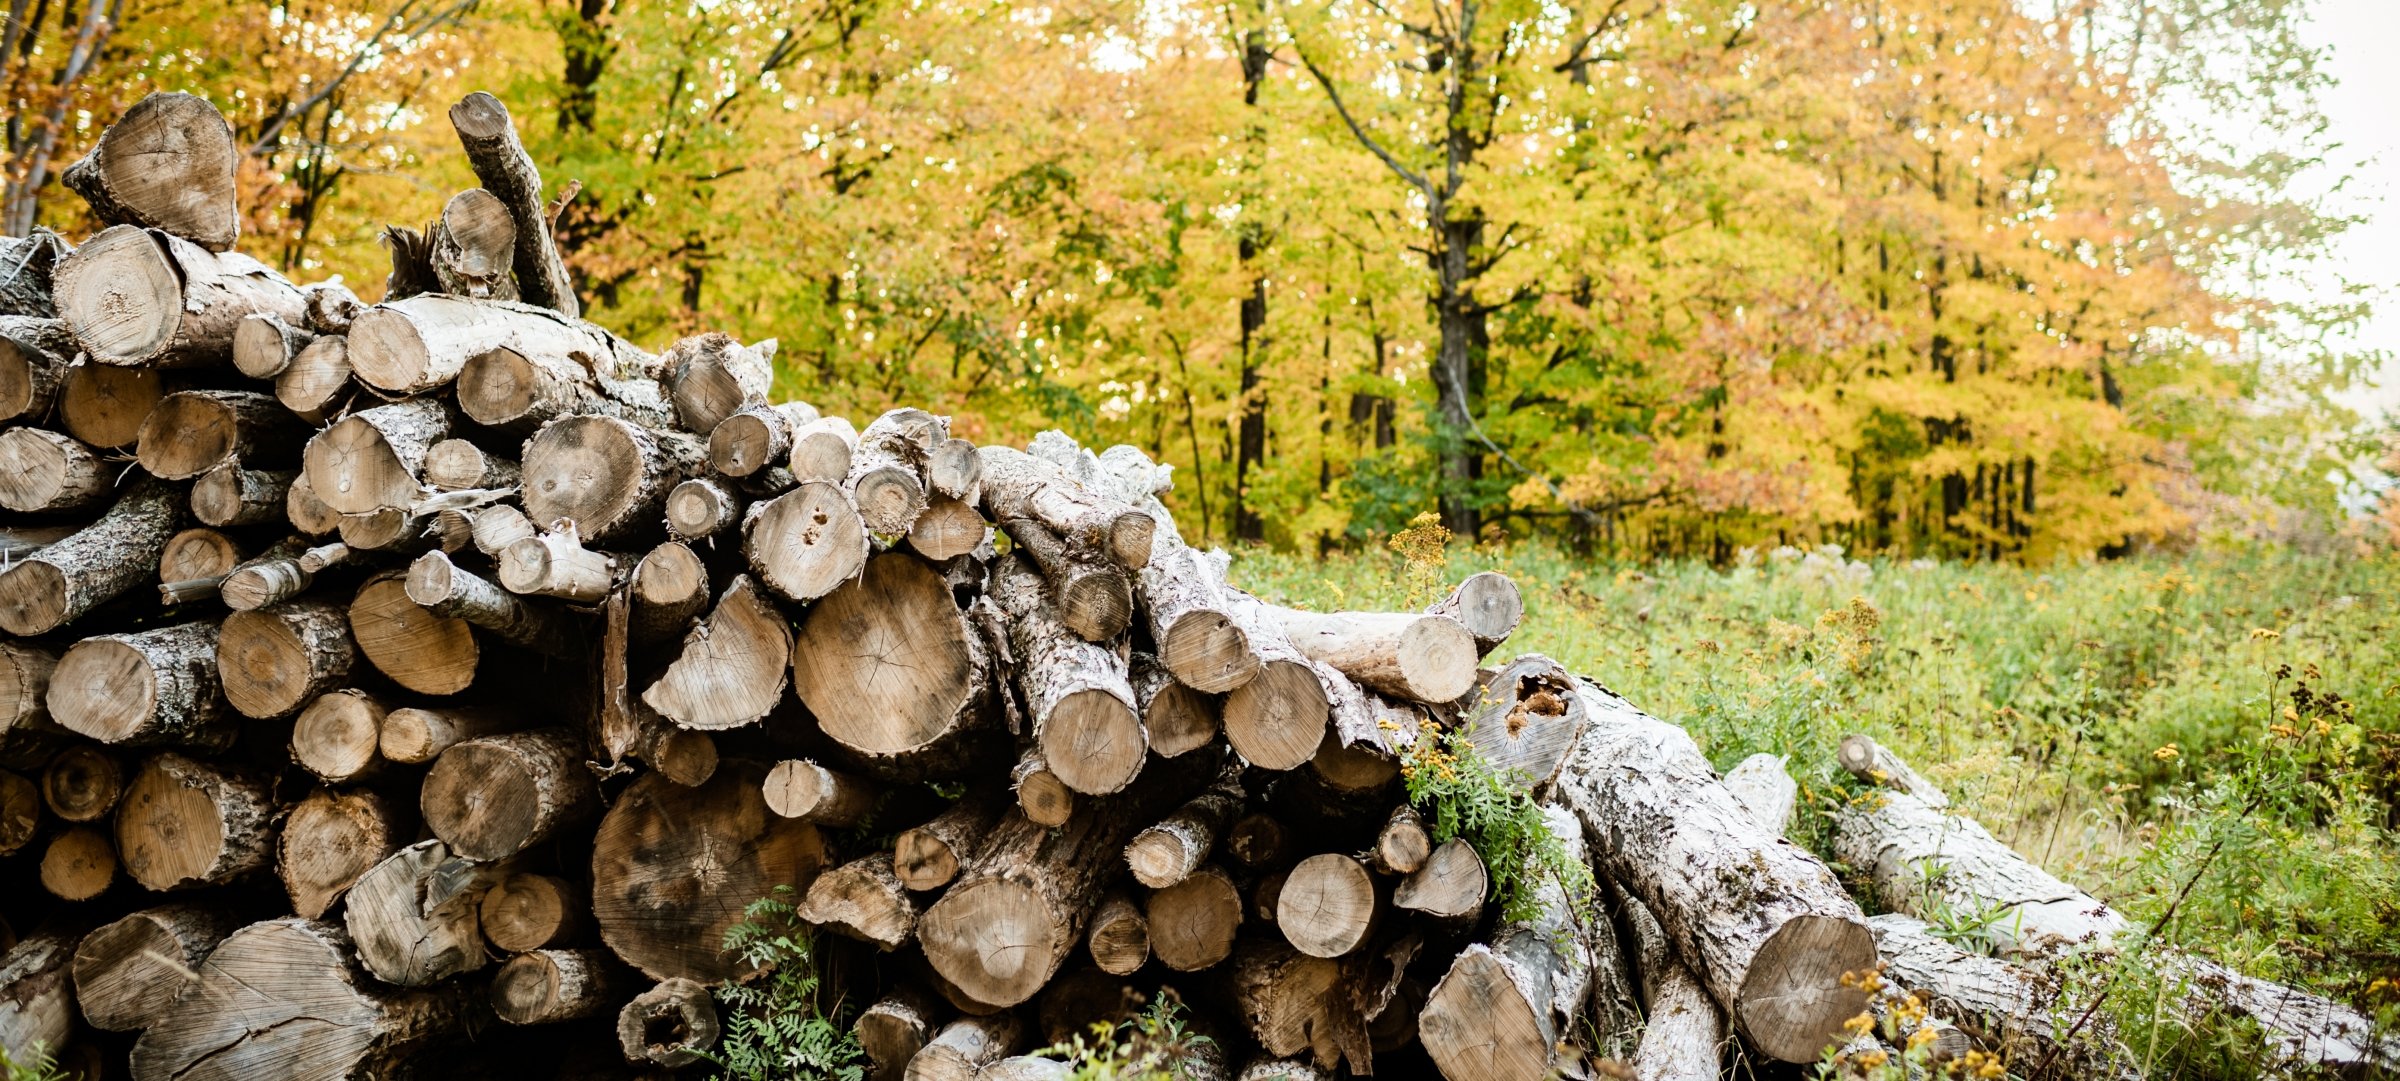 A pile of logs in a fall forest.